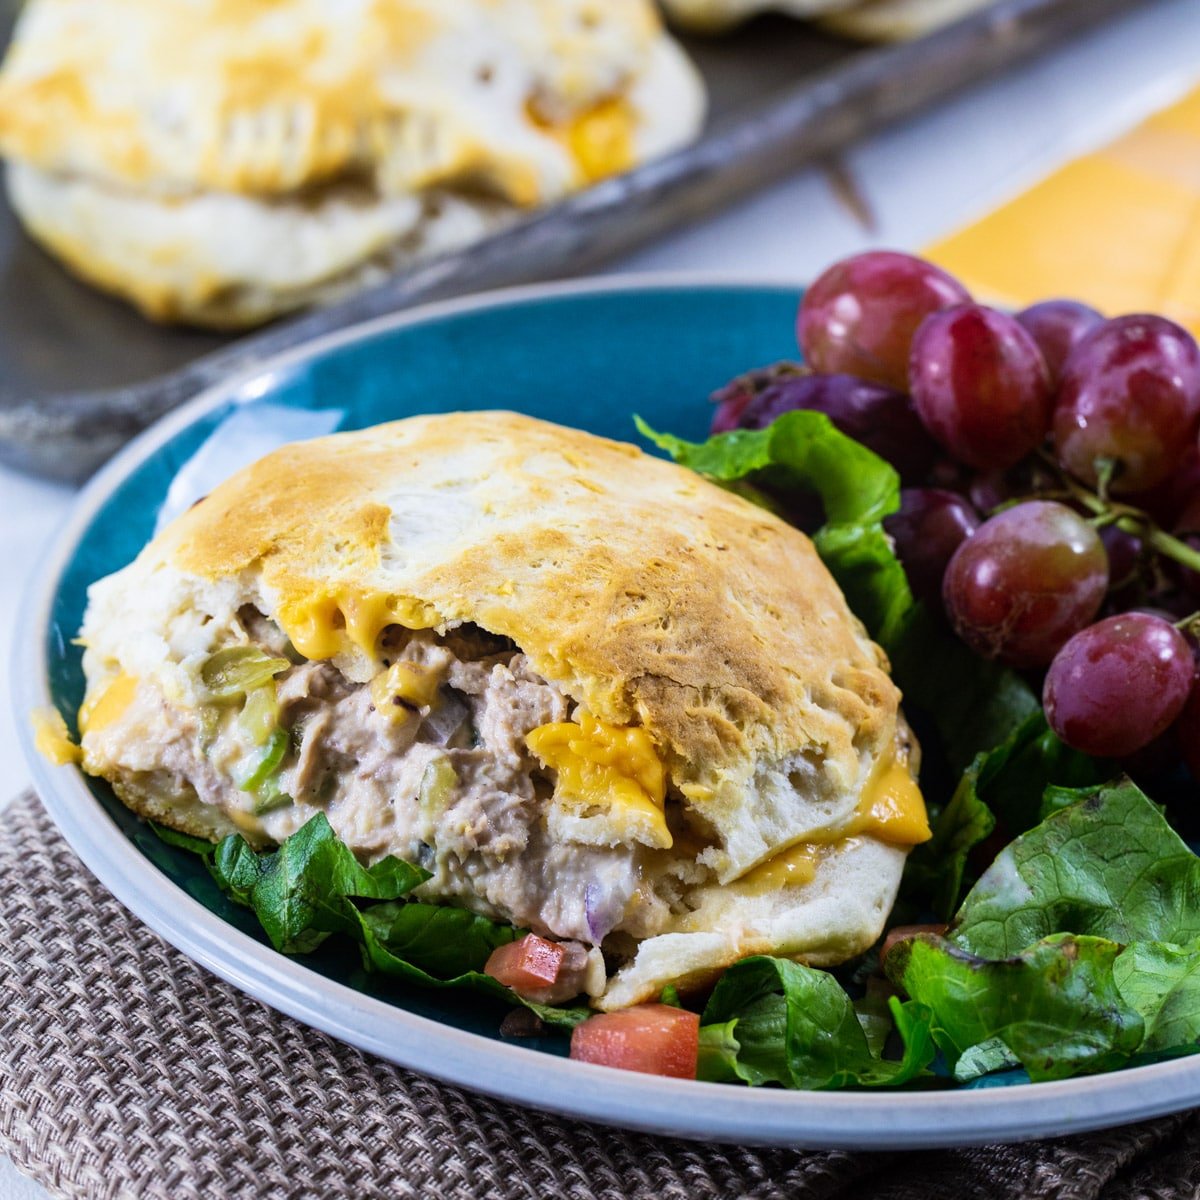 Biscuit Tuna Melts on a plate.